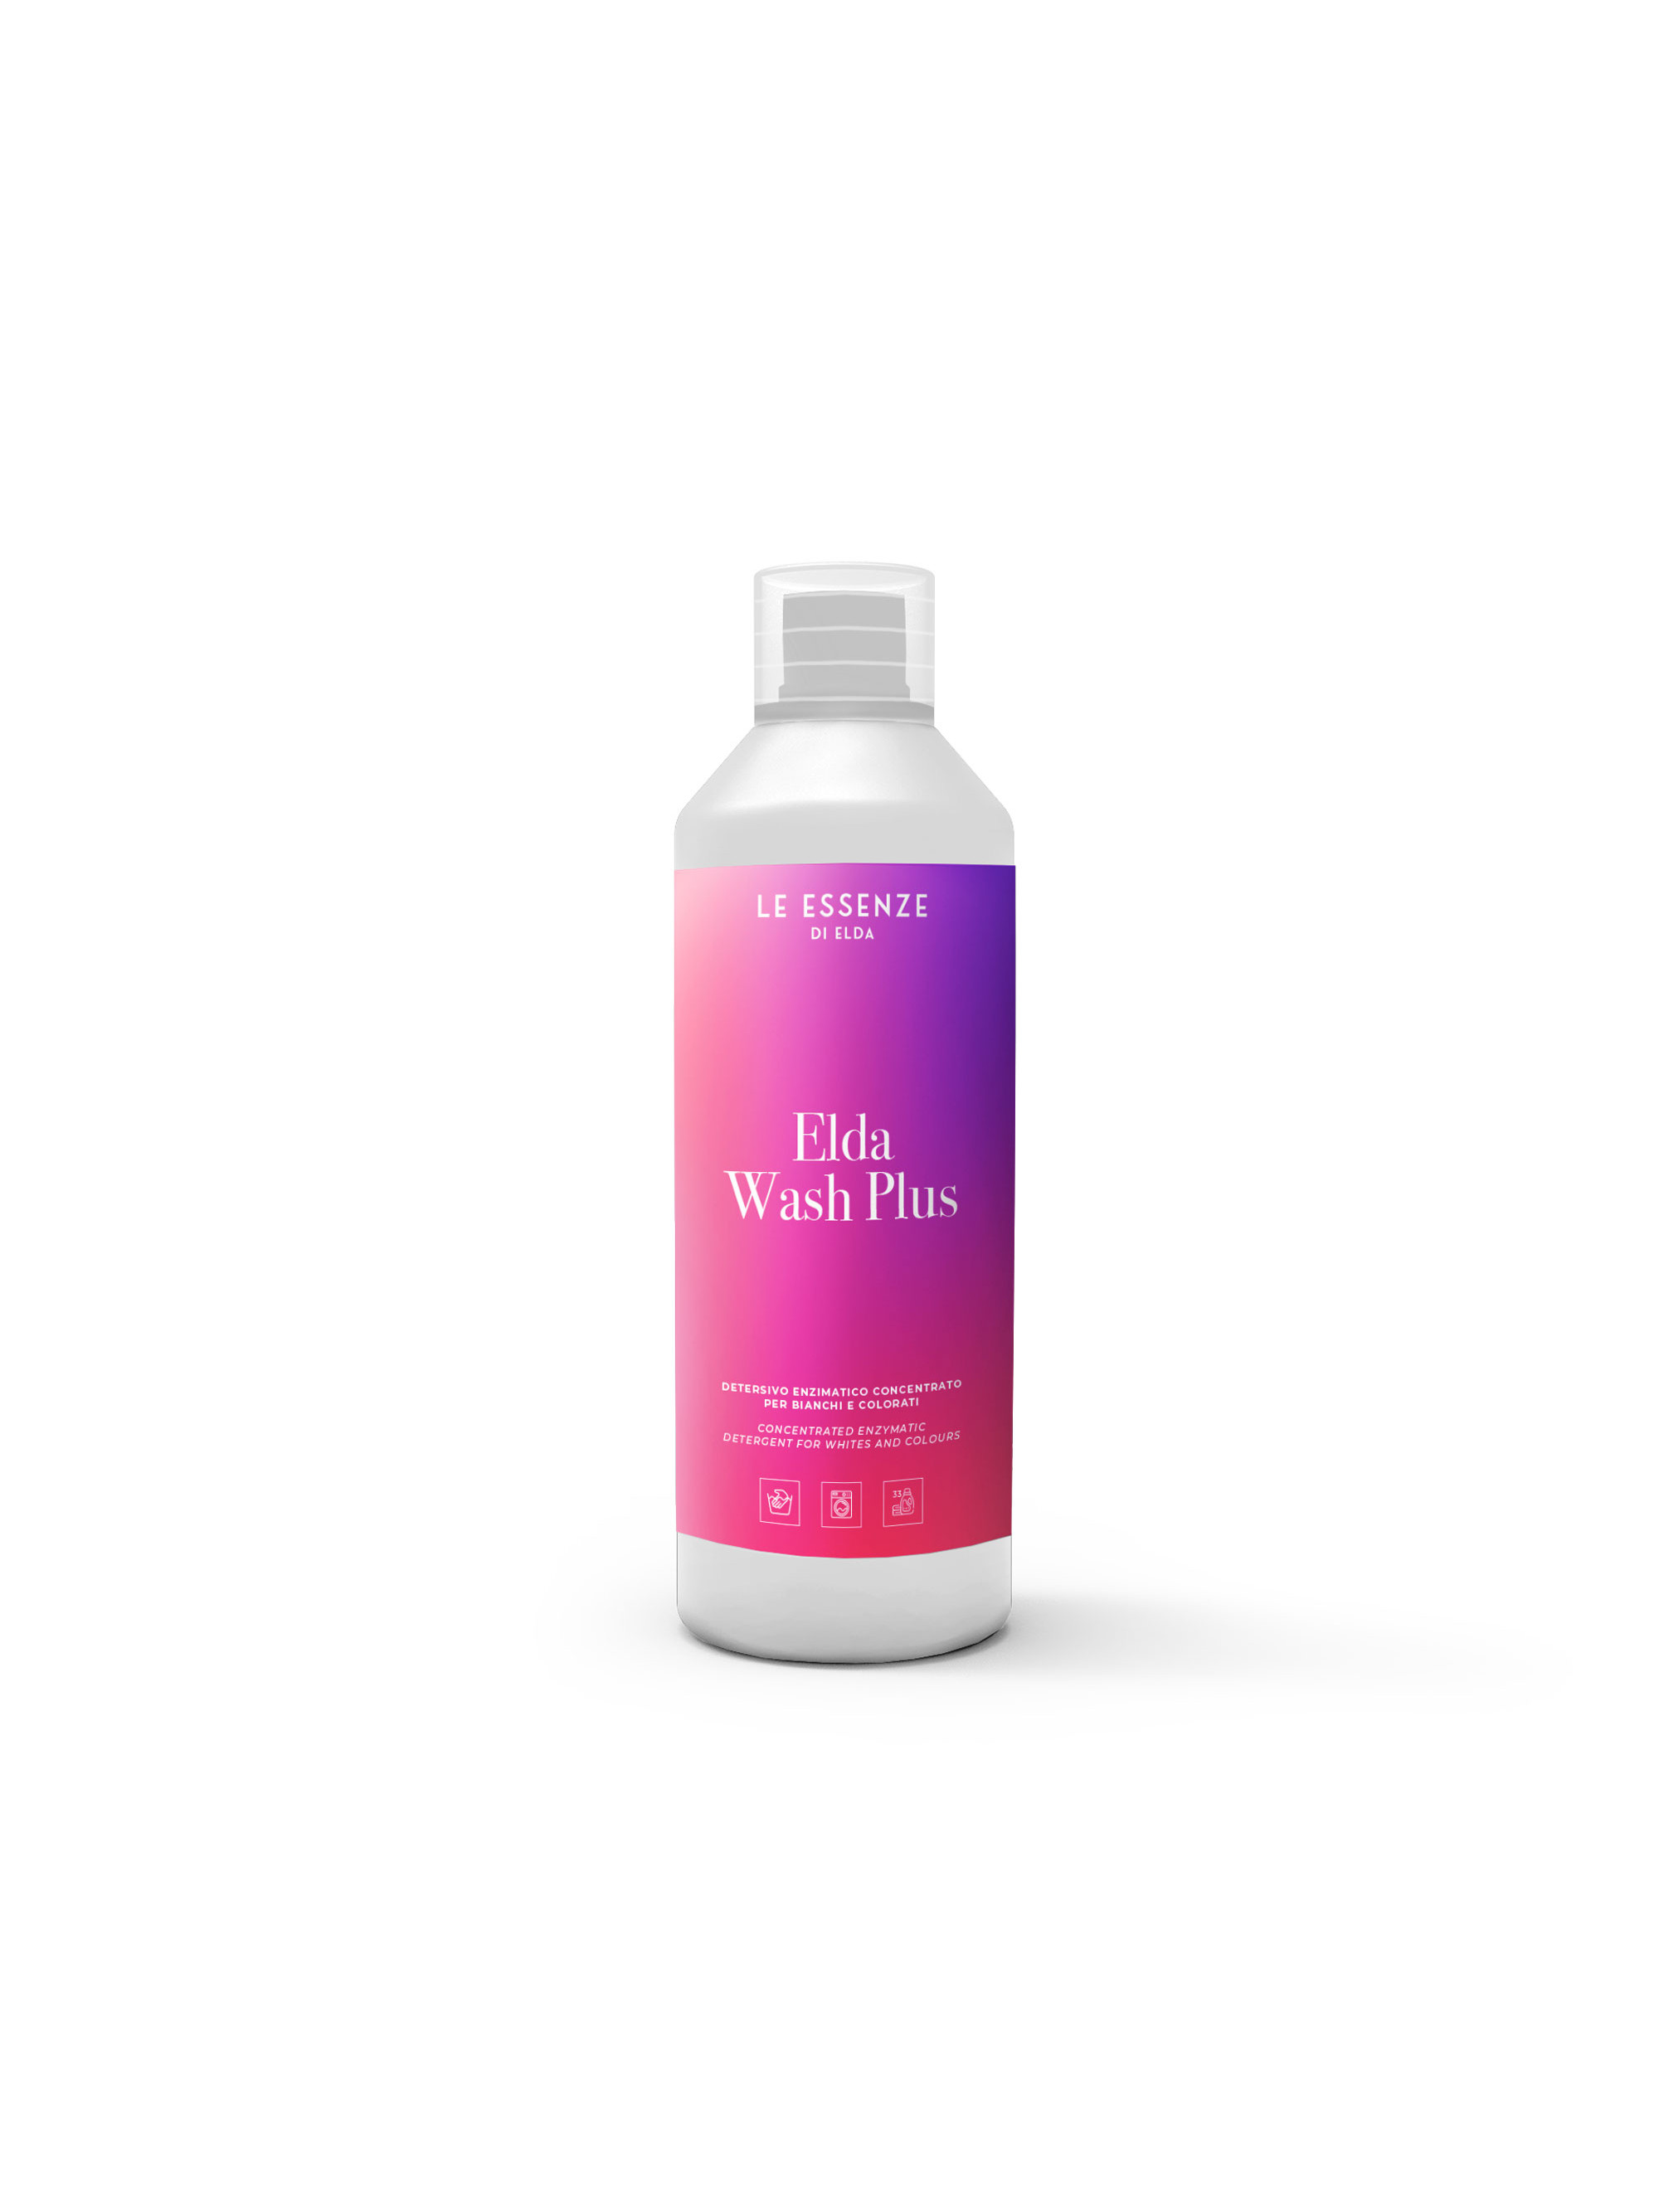 Elda Wash Plus - Concentrated enzymatic detergent for whites and colors